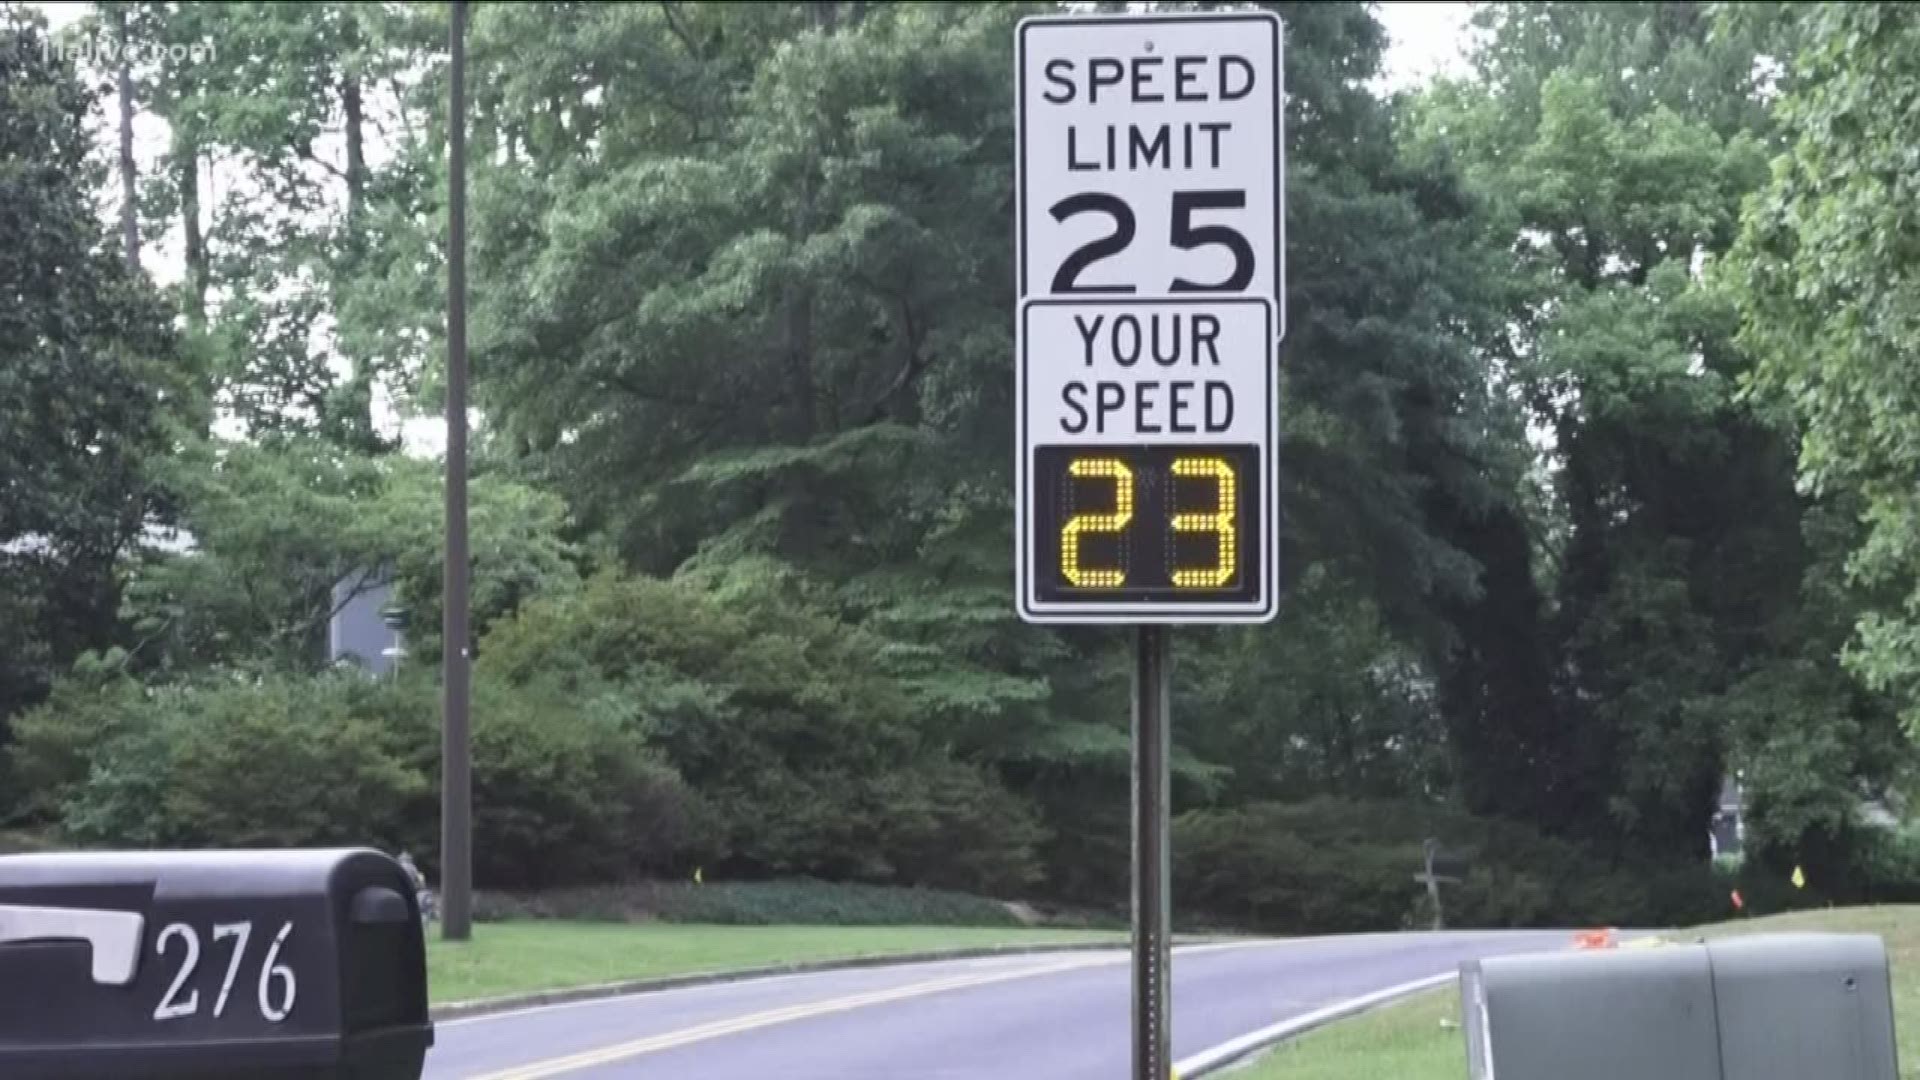 A man fed up with speeders put four bright signs in his yard that said "Slow the F Down." A month later, a speed sensory device was installed by police.